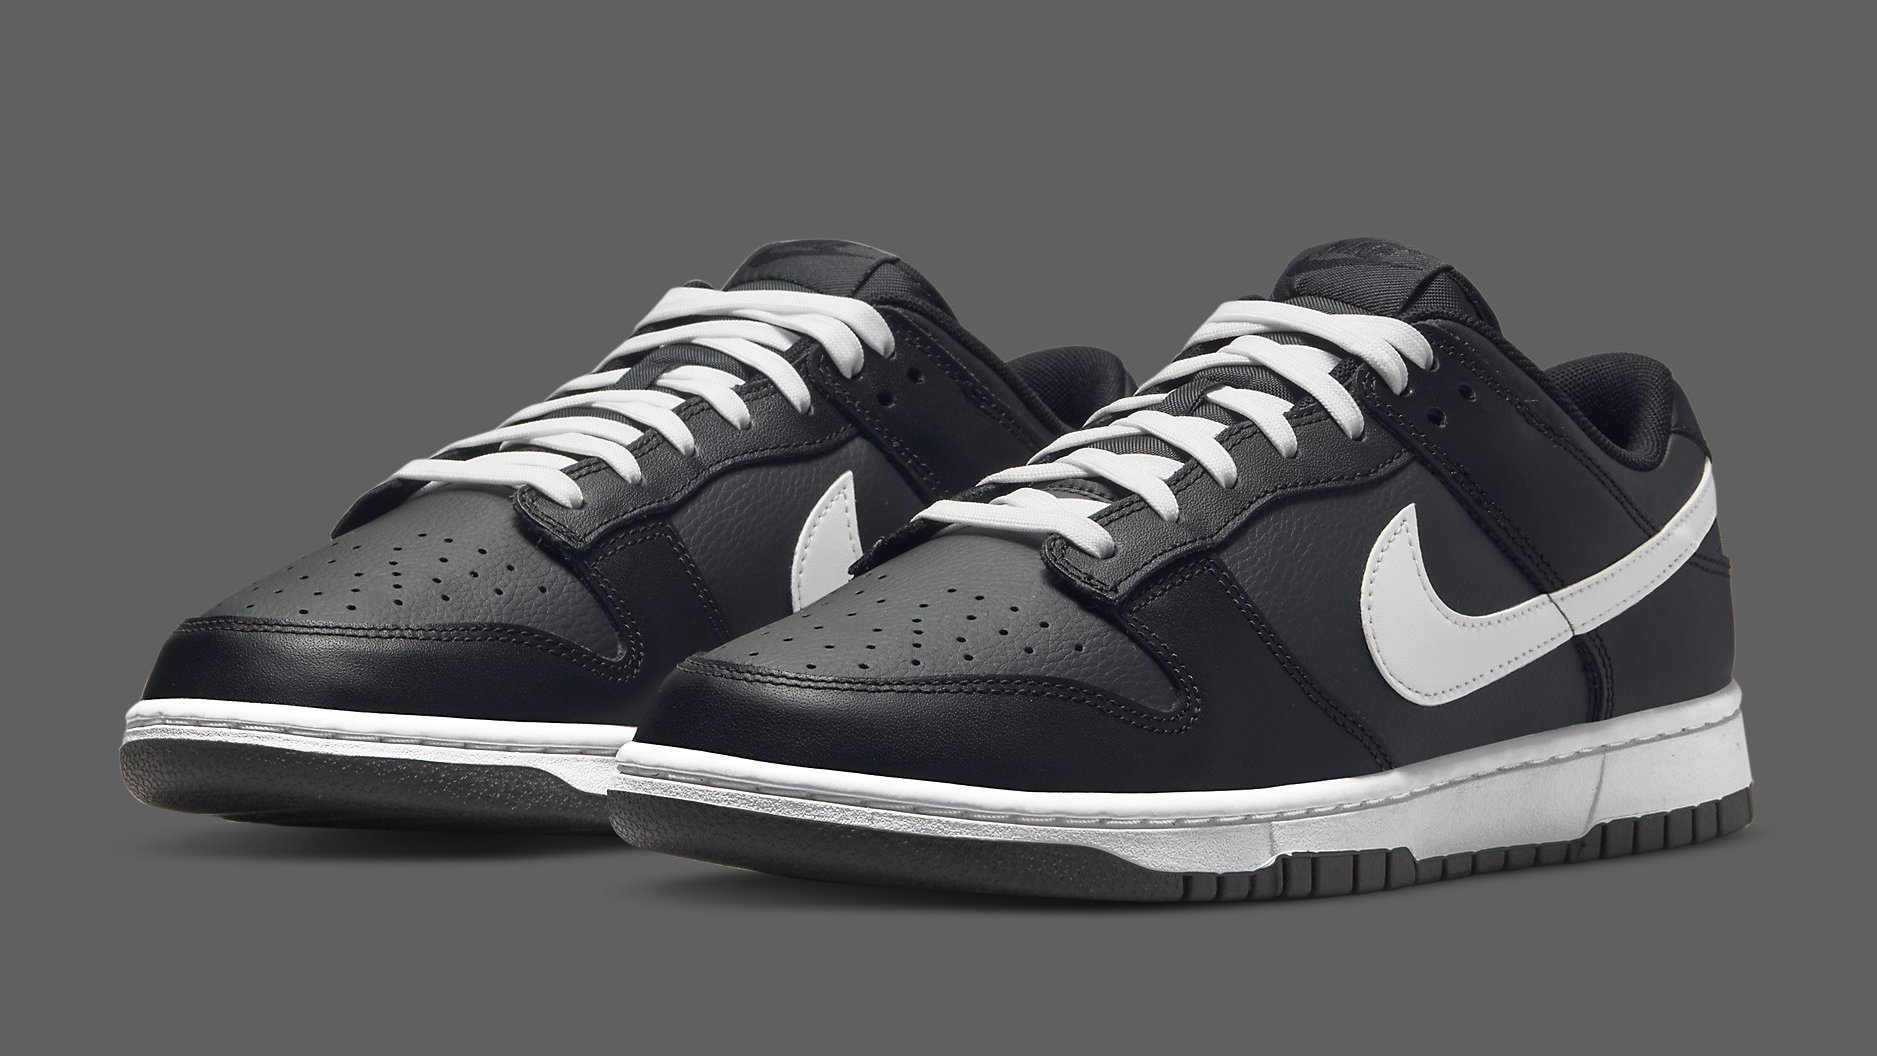 Another Black and Nike Dunk Is Releasing | Complex